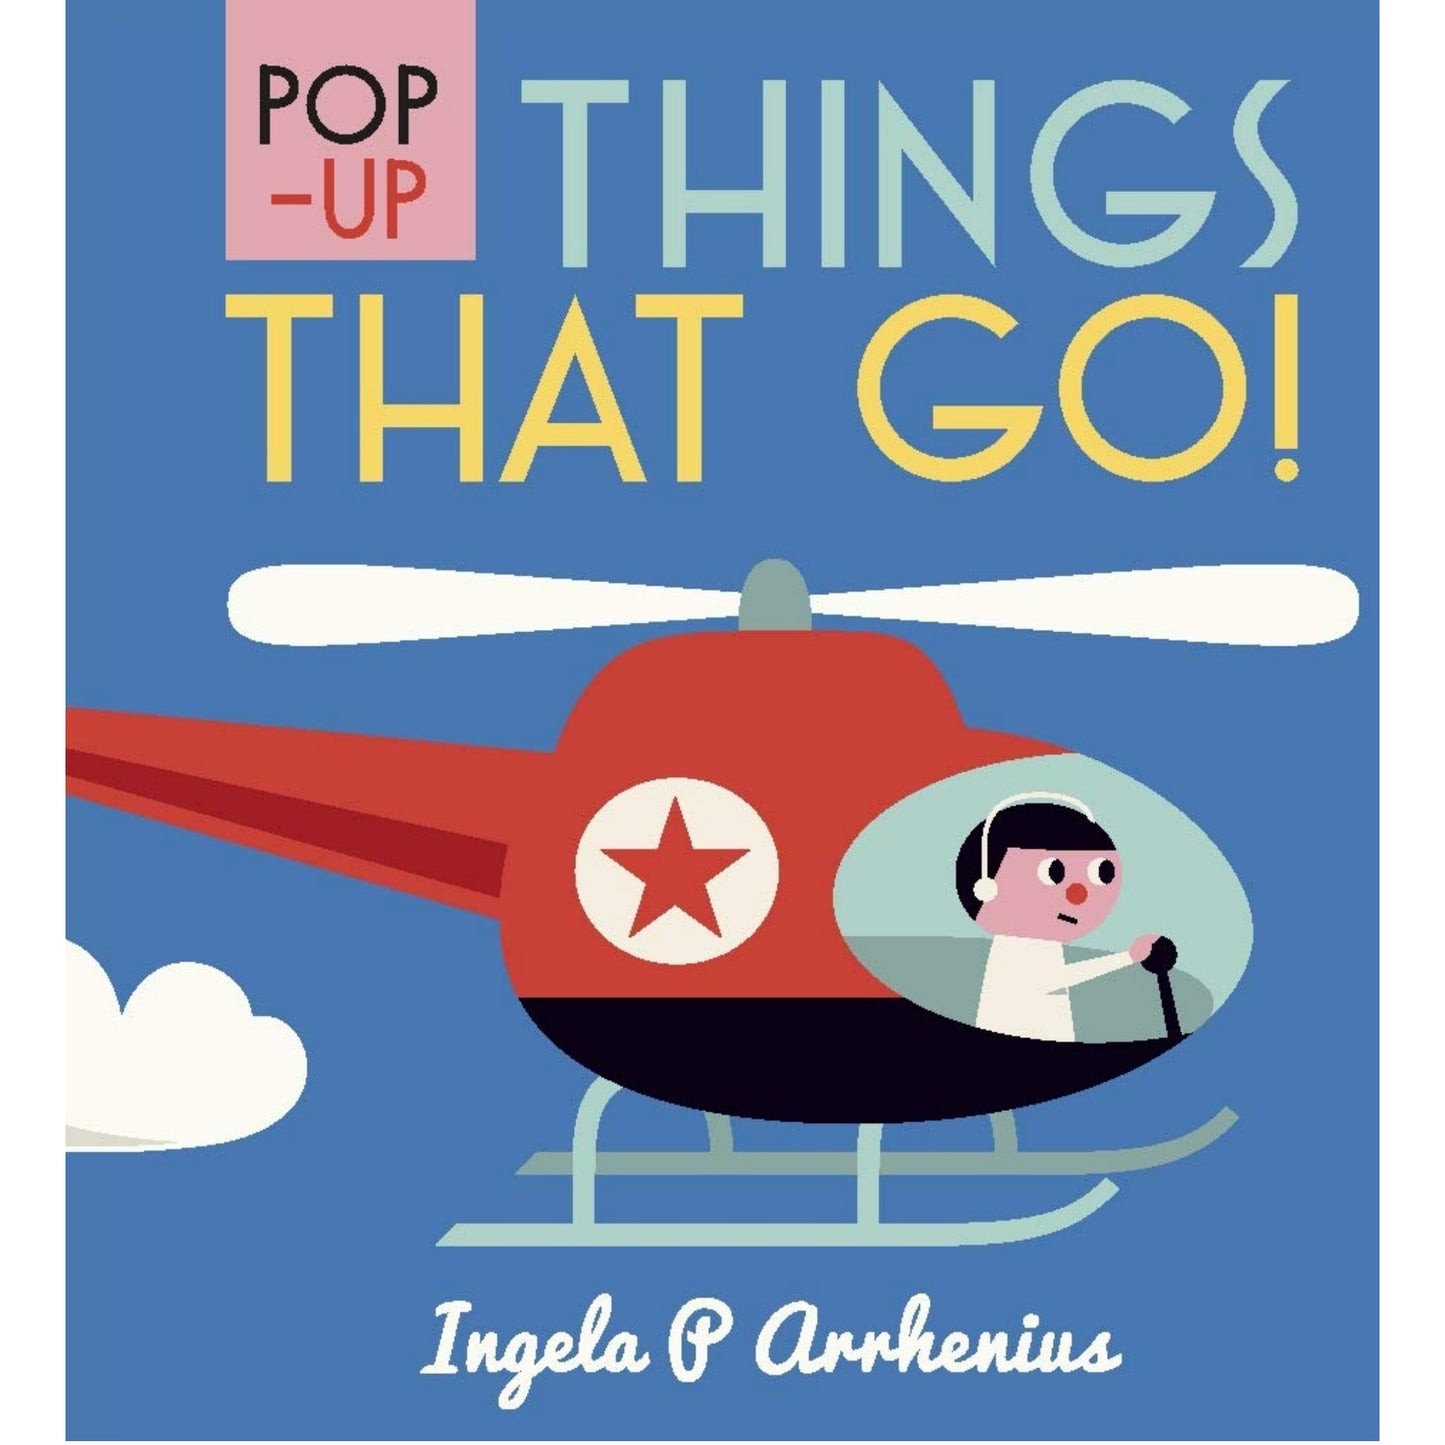 Pop-up Things That Go! | Interactive Book for Babies & Toddlers